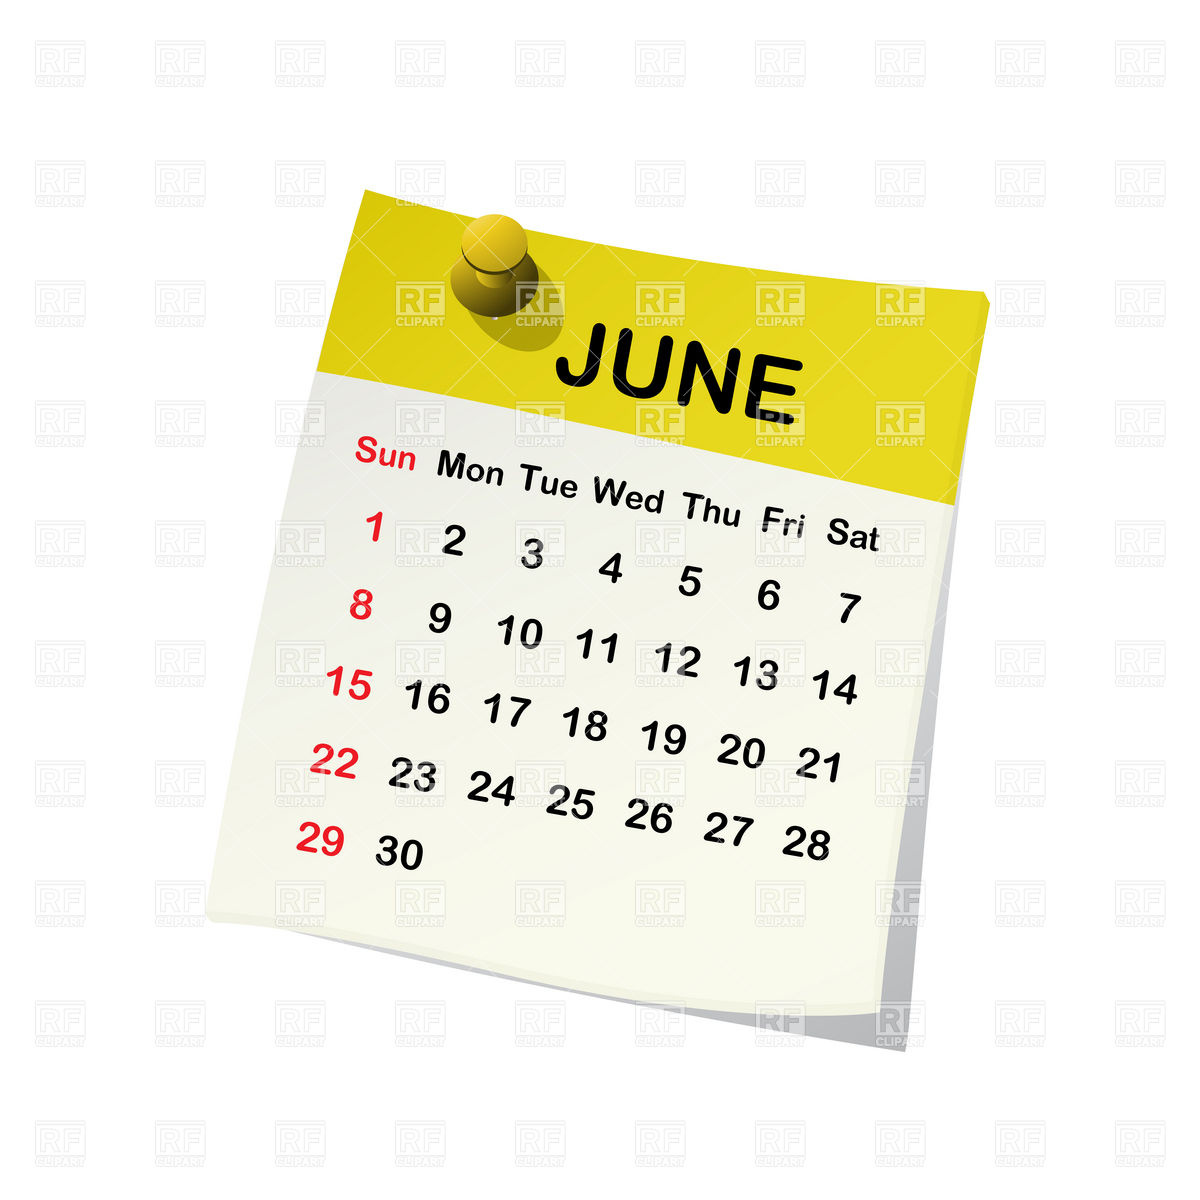 June 2014 Month Calendar 20536 Download Royalty Free Vector Clipart